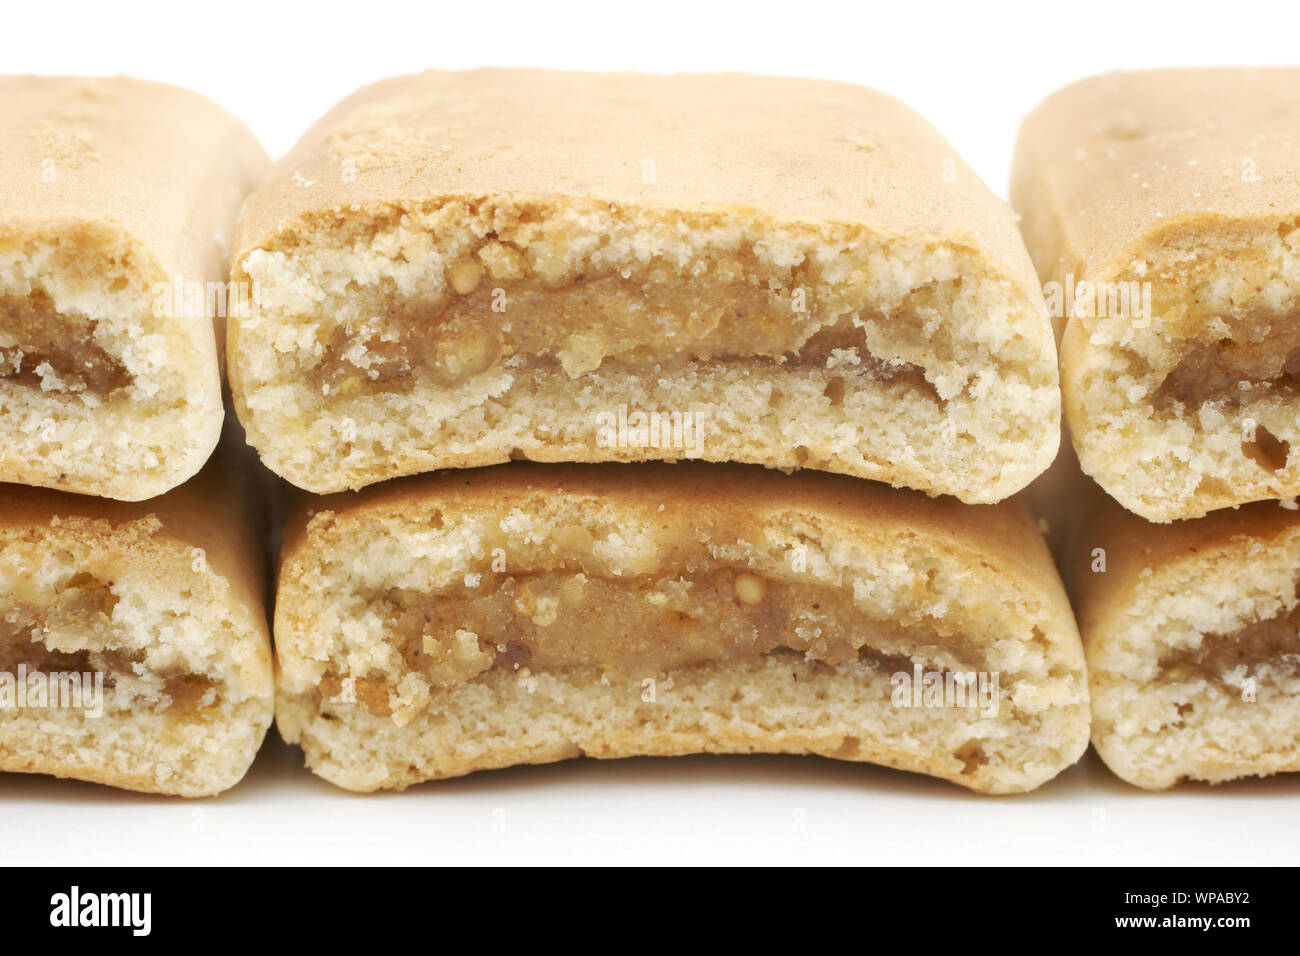 Apple date bars arranged to show the sweet filling inside.  The bars are isolated on white background. Stock Photo